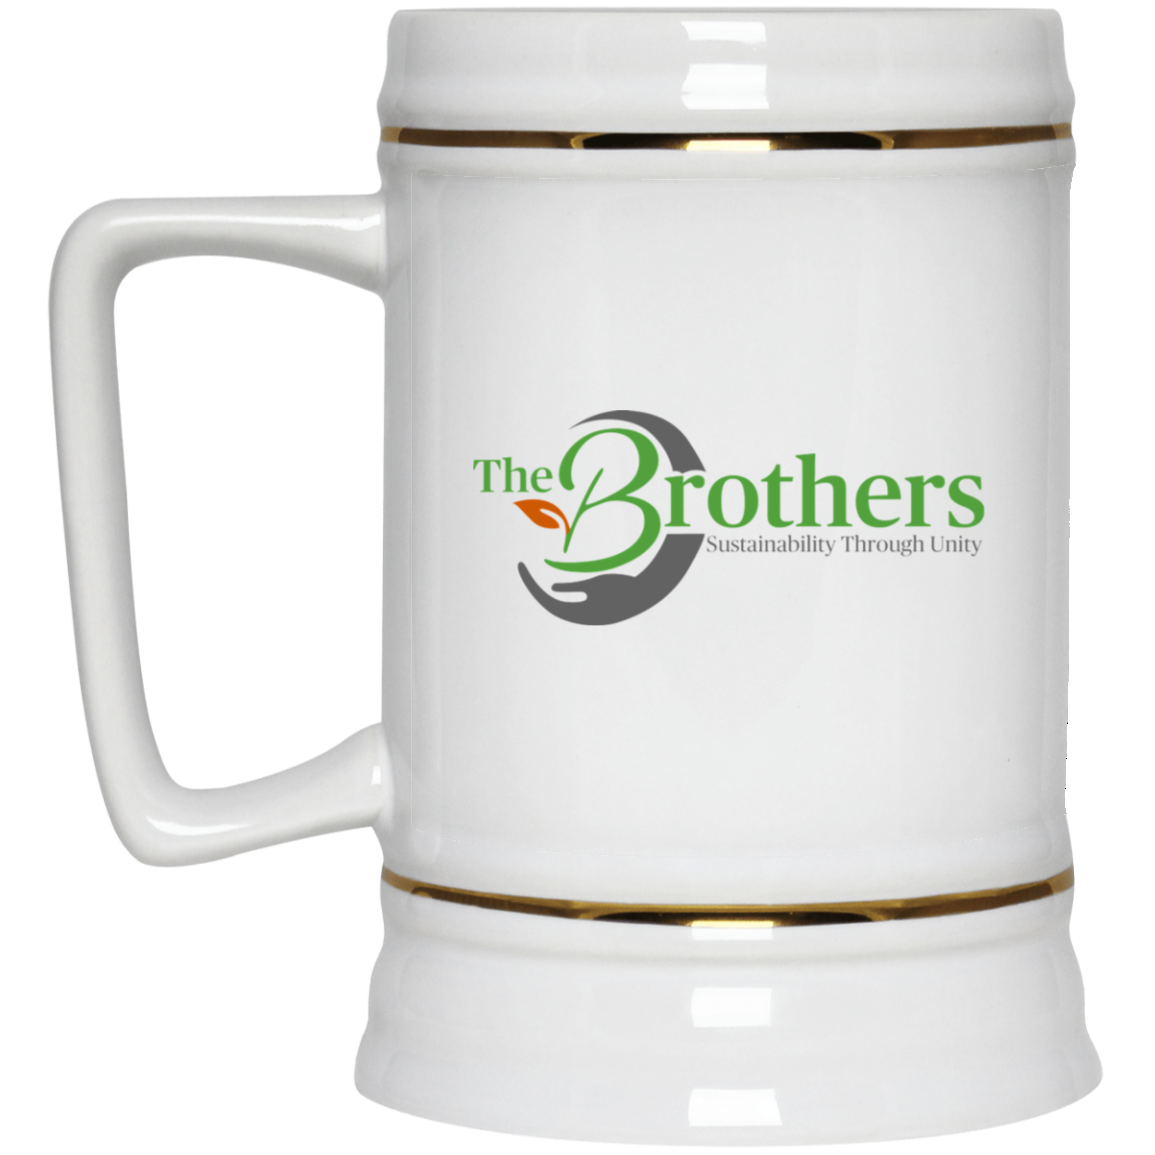 The Brothers Beer Stein 22oz.